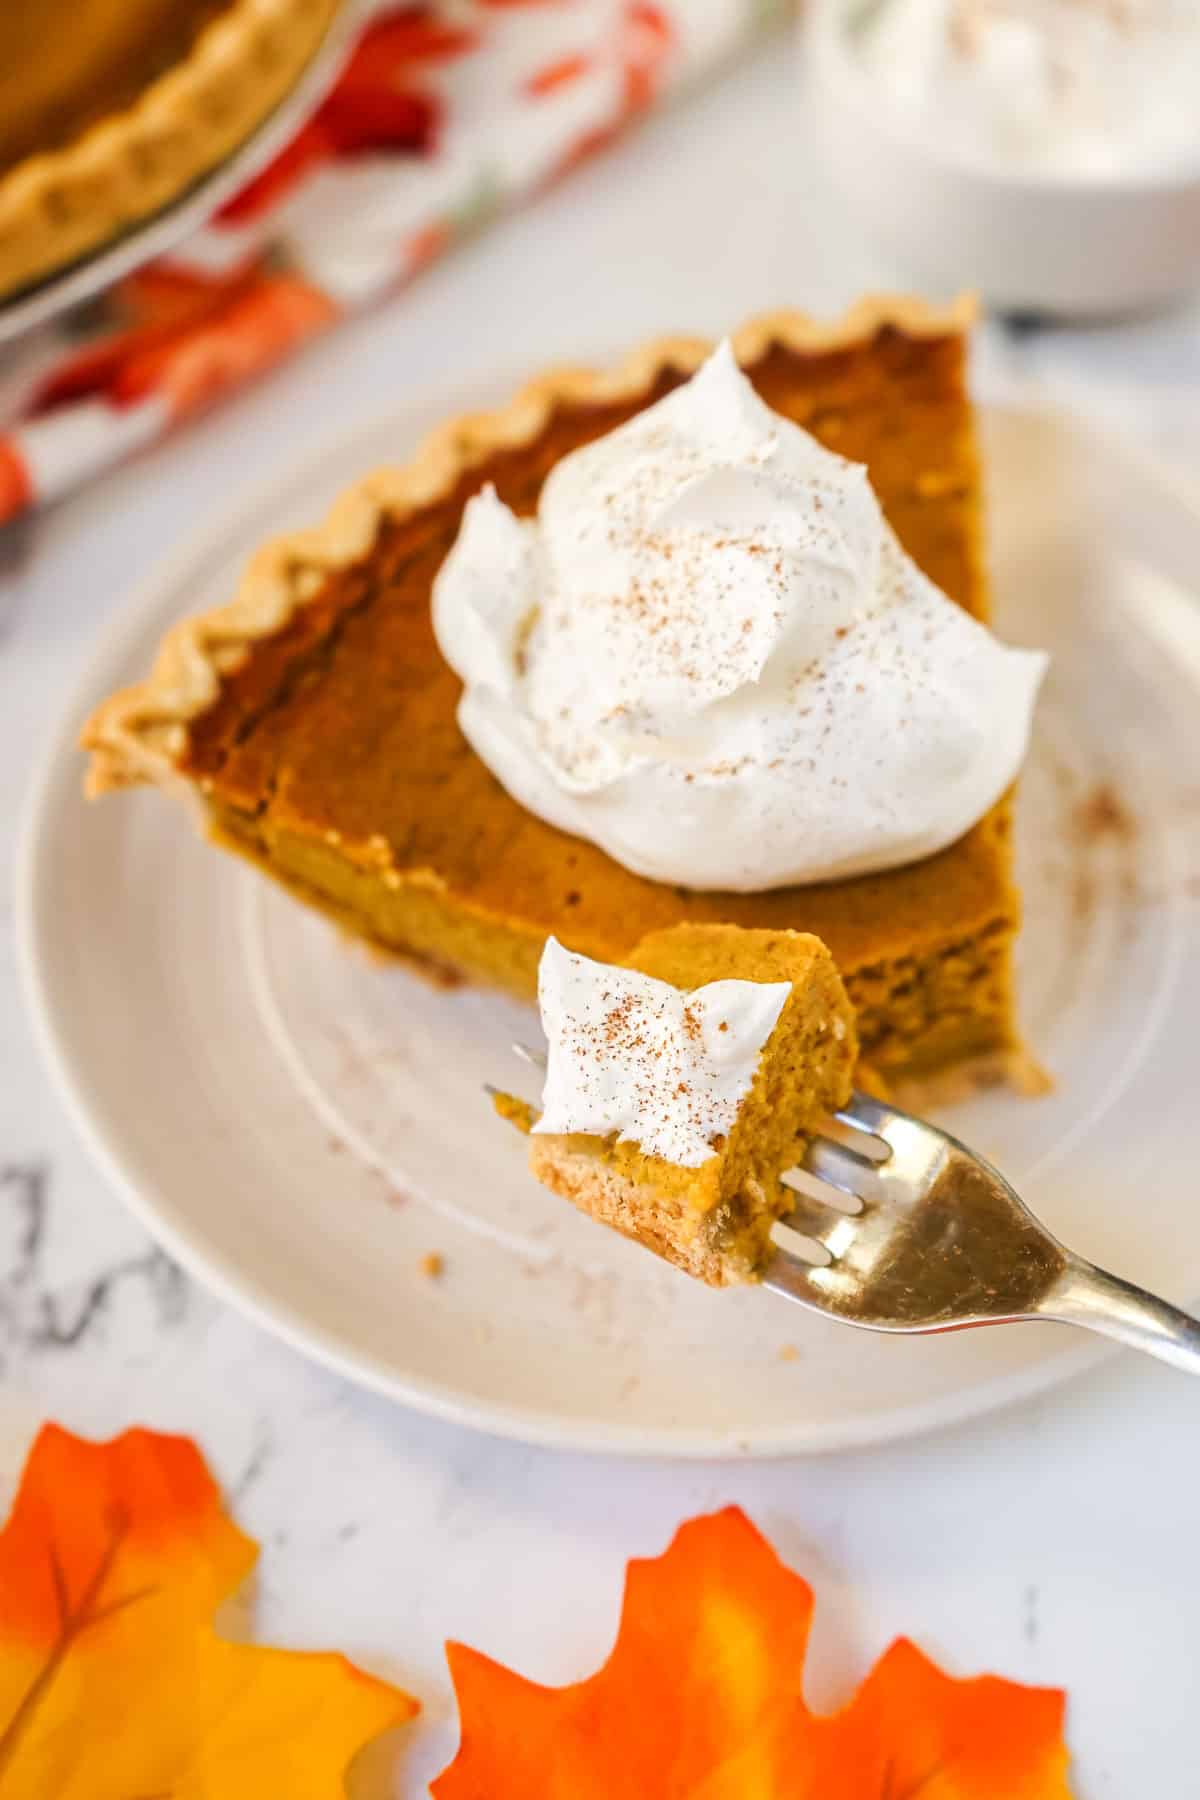 How long does pumpkin pie last in the fridge. A slice of pumpkin pie with cinnamon whipped cream.